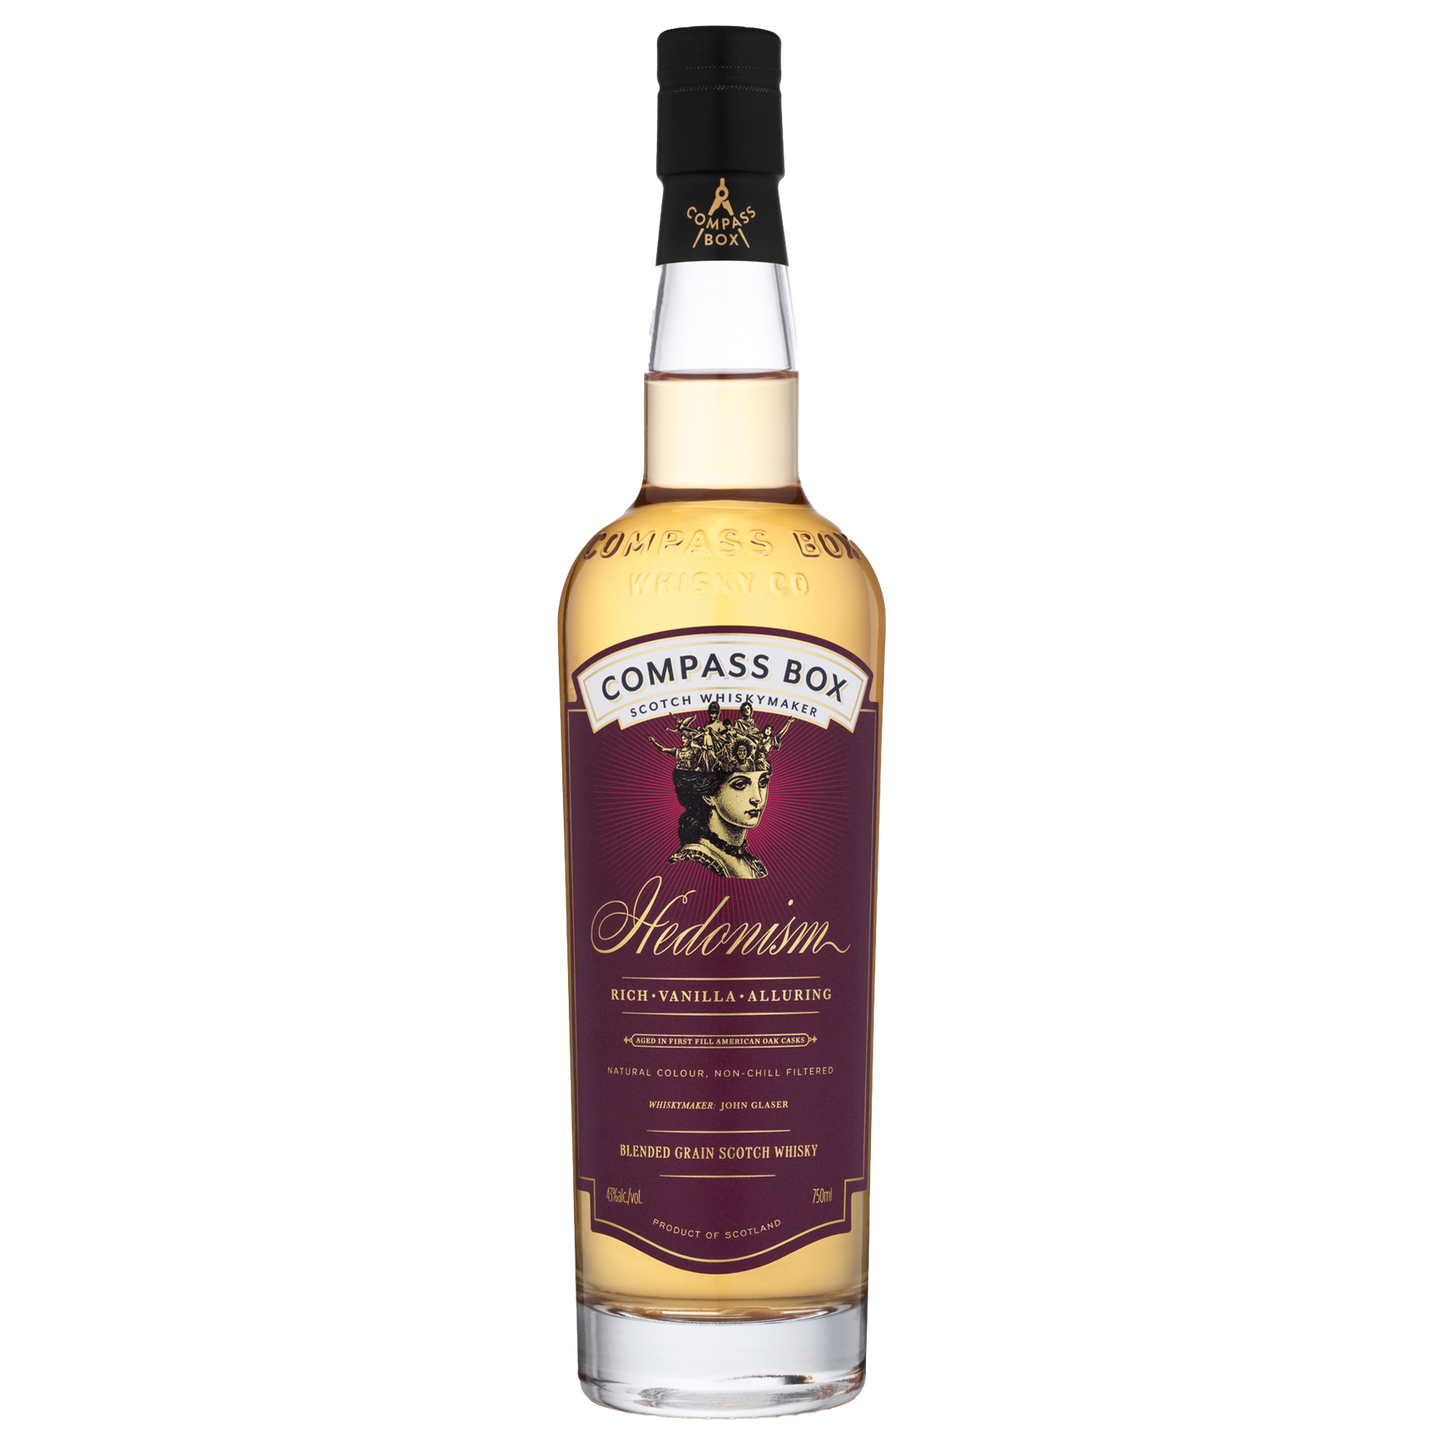 Compass Box Hedonism Blended Grain Scotch Whisky 700ml